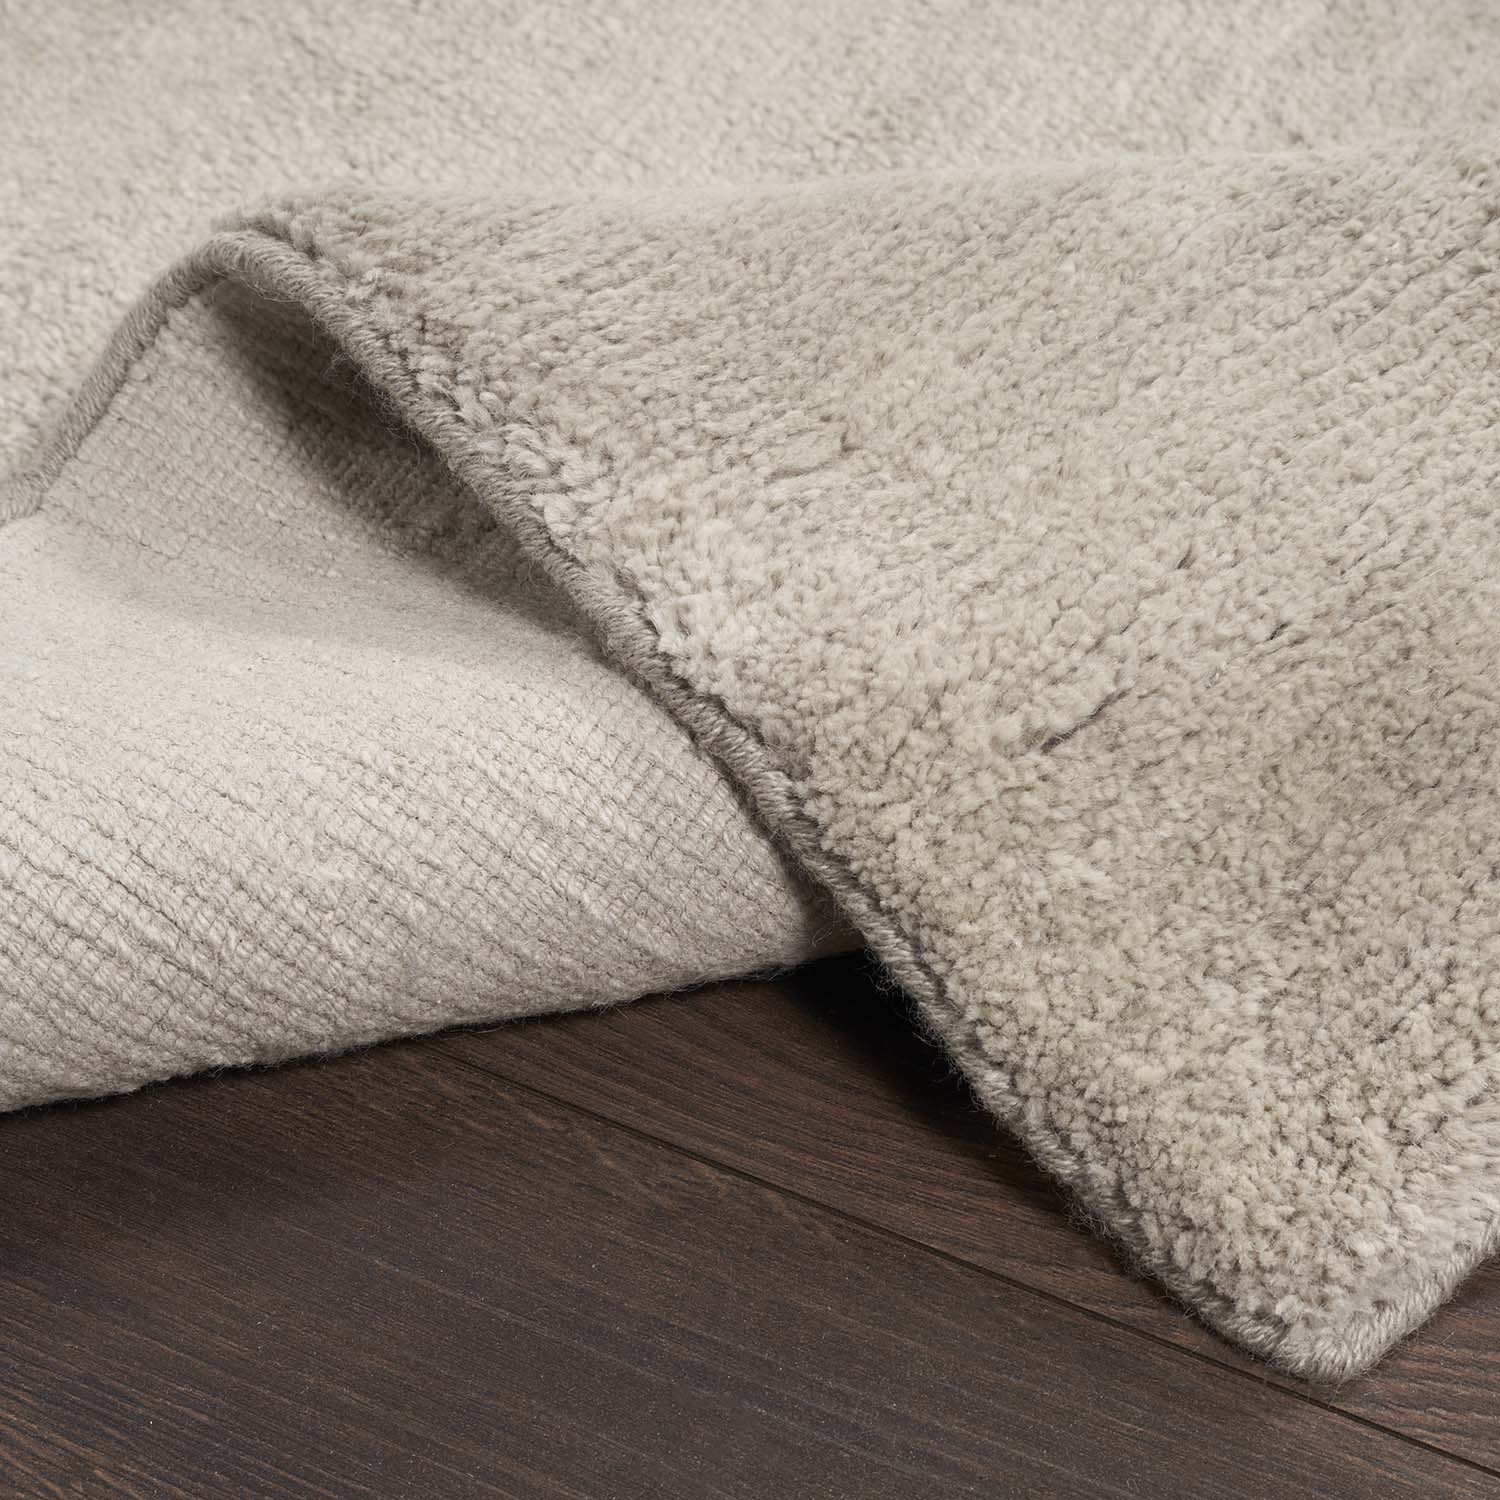 Close-up of soft plush fabric with a fold on wooden floor.